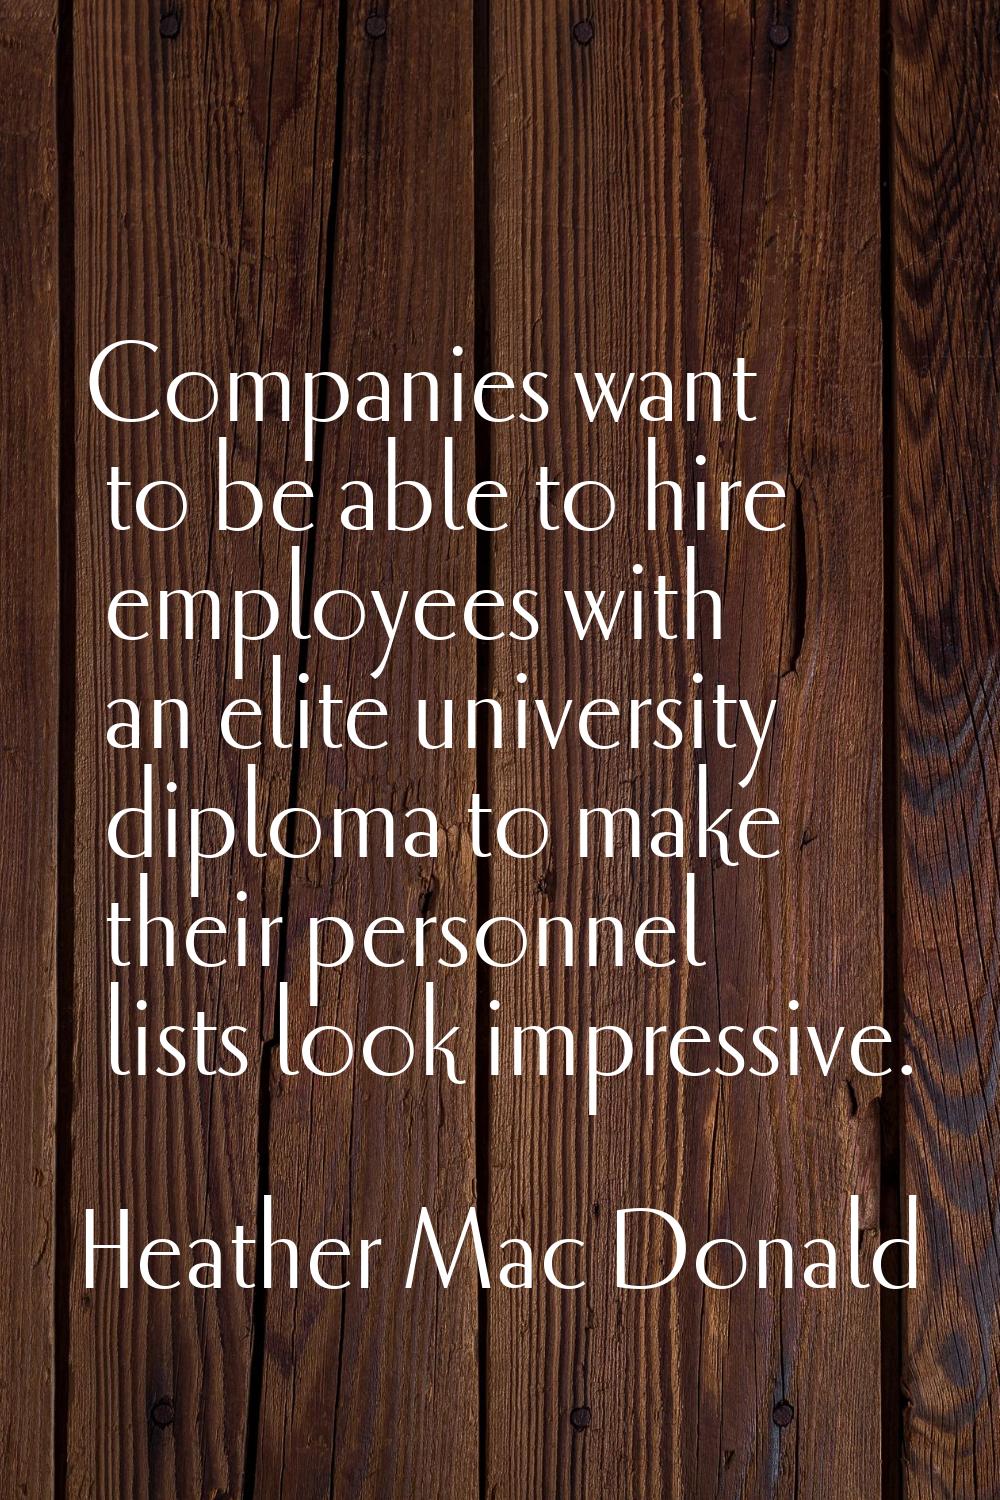 Companies want to be able to hire employees with an elite university diploma to make their personne